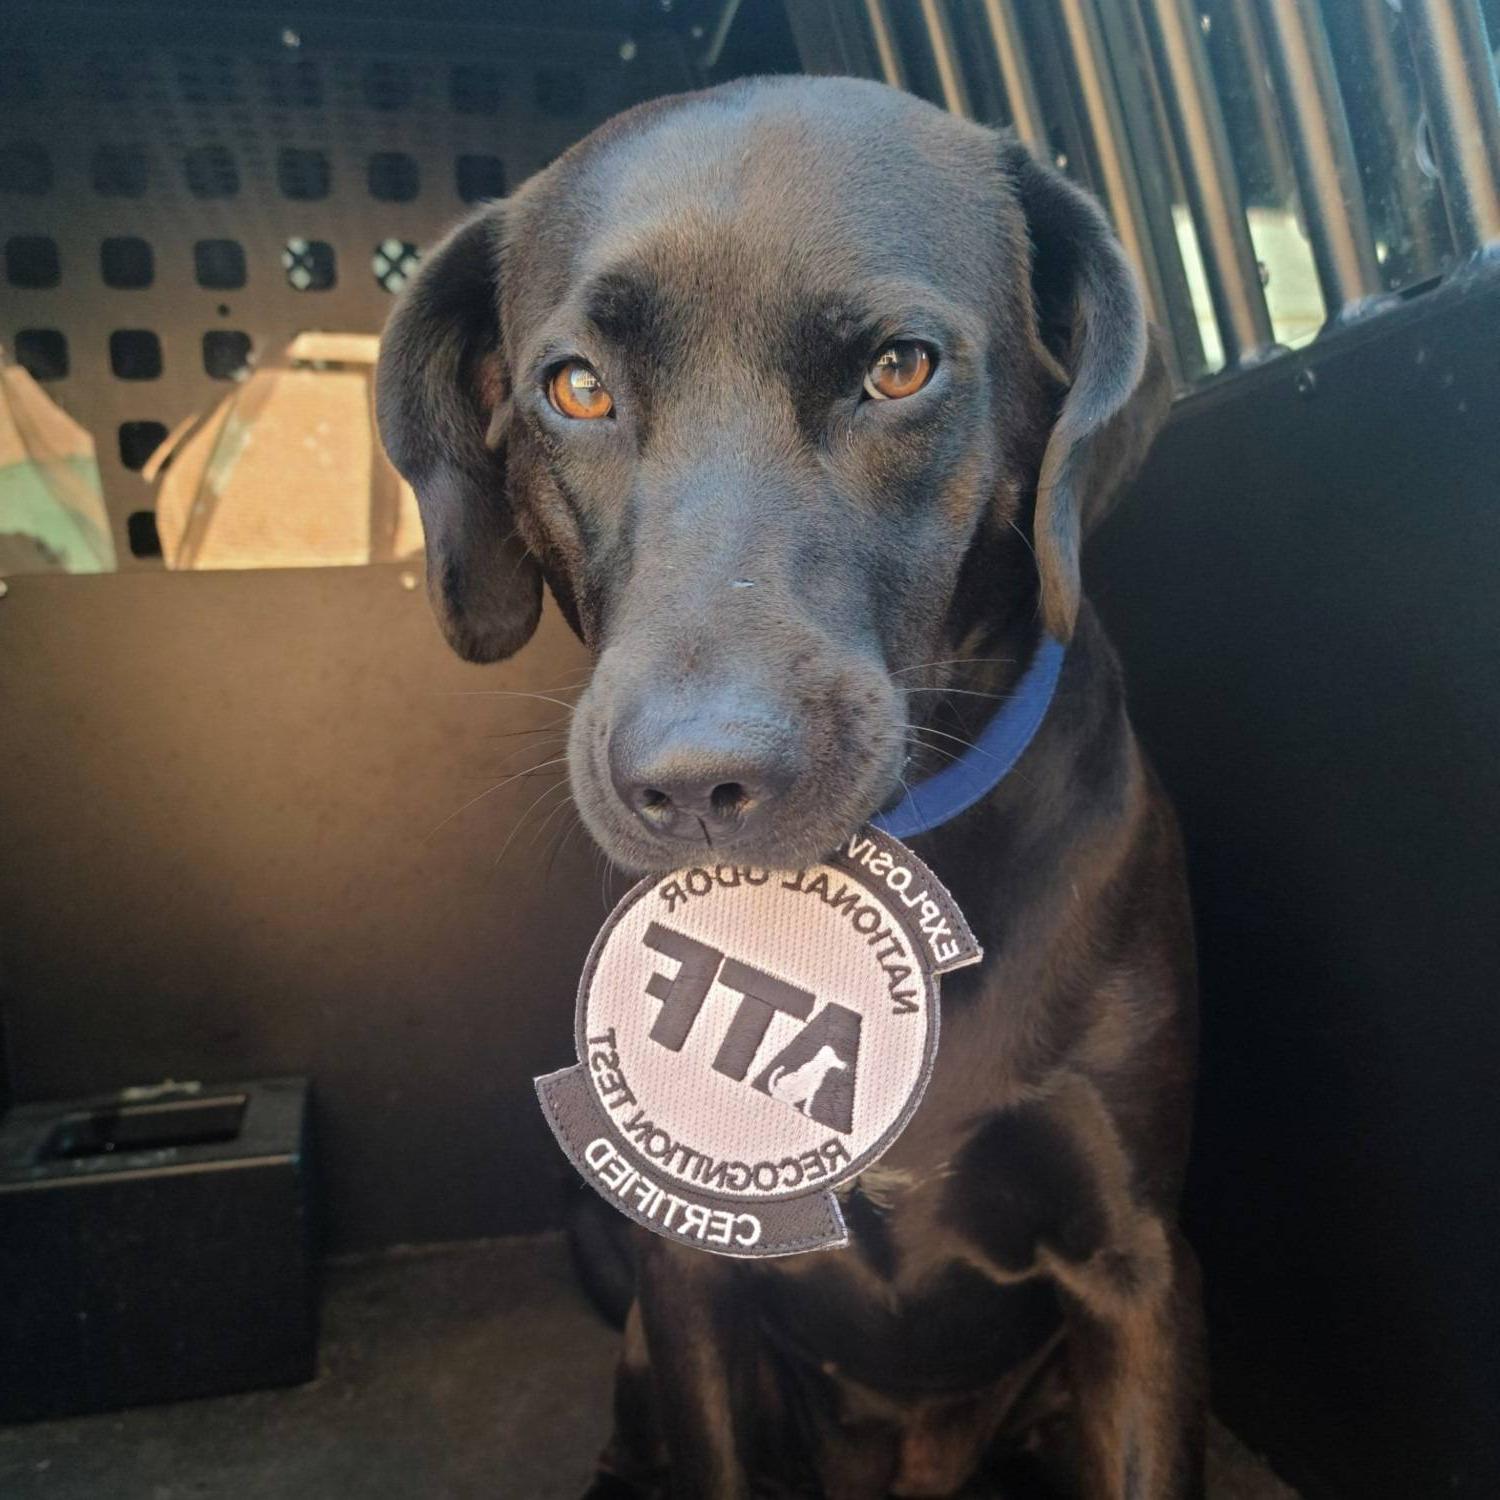 A black lab dog with a blue collar sitting in the back of a police cruiser with a patch in her mouth that states Explosive Certified, ATF国家气味识别测试